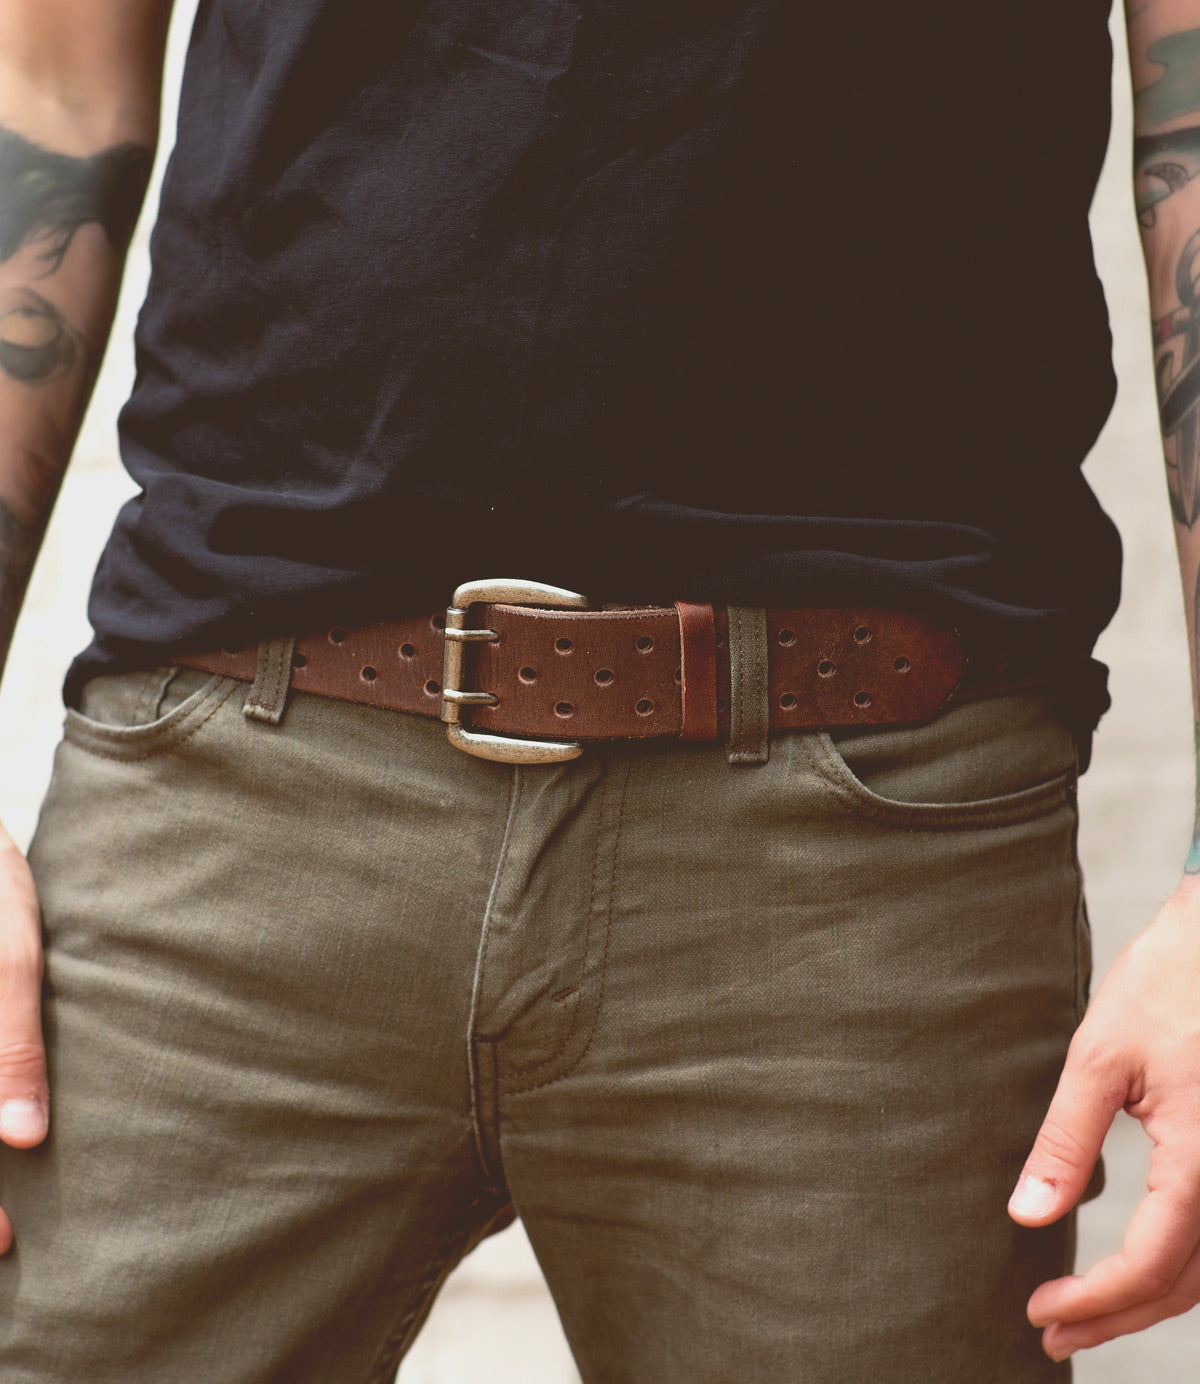 A person wearing a dark t-shirt and olive pants with a timelessly designed brown vegetable-tanned leather belt named Mccoy by Bed Stu. The person's hands are resting near their pockets, partially showing tattoos on their forearms.